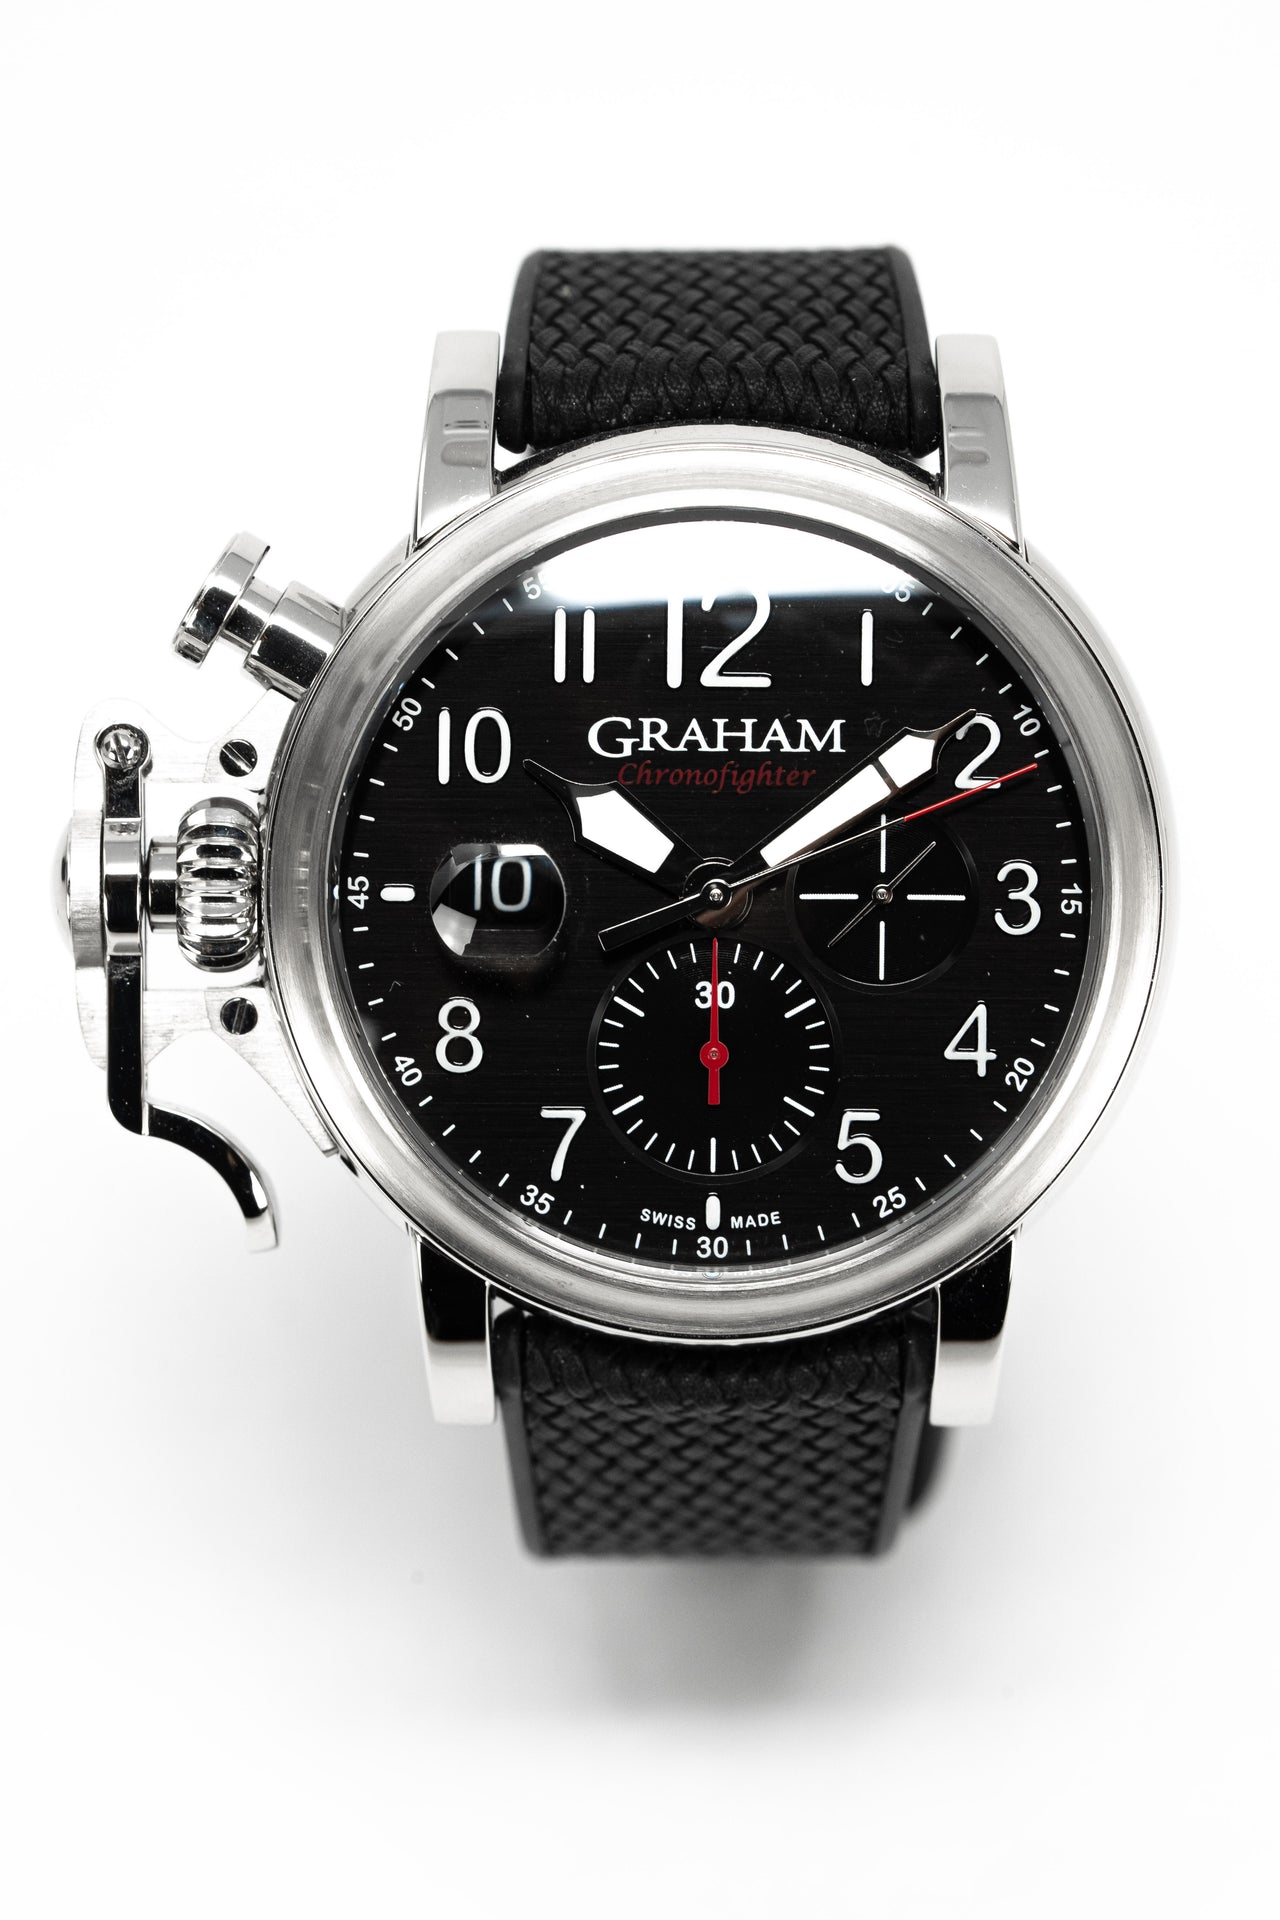 Graham Chronofighter Grand Vintage Arabic Numerals Black Rubber 2CVDS.B29A